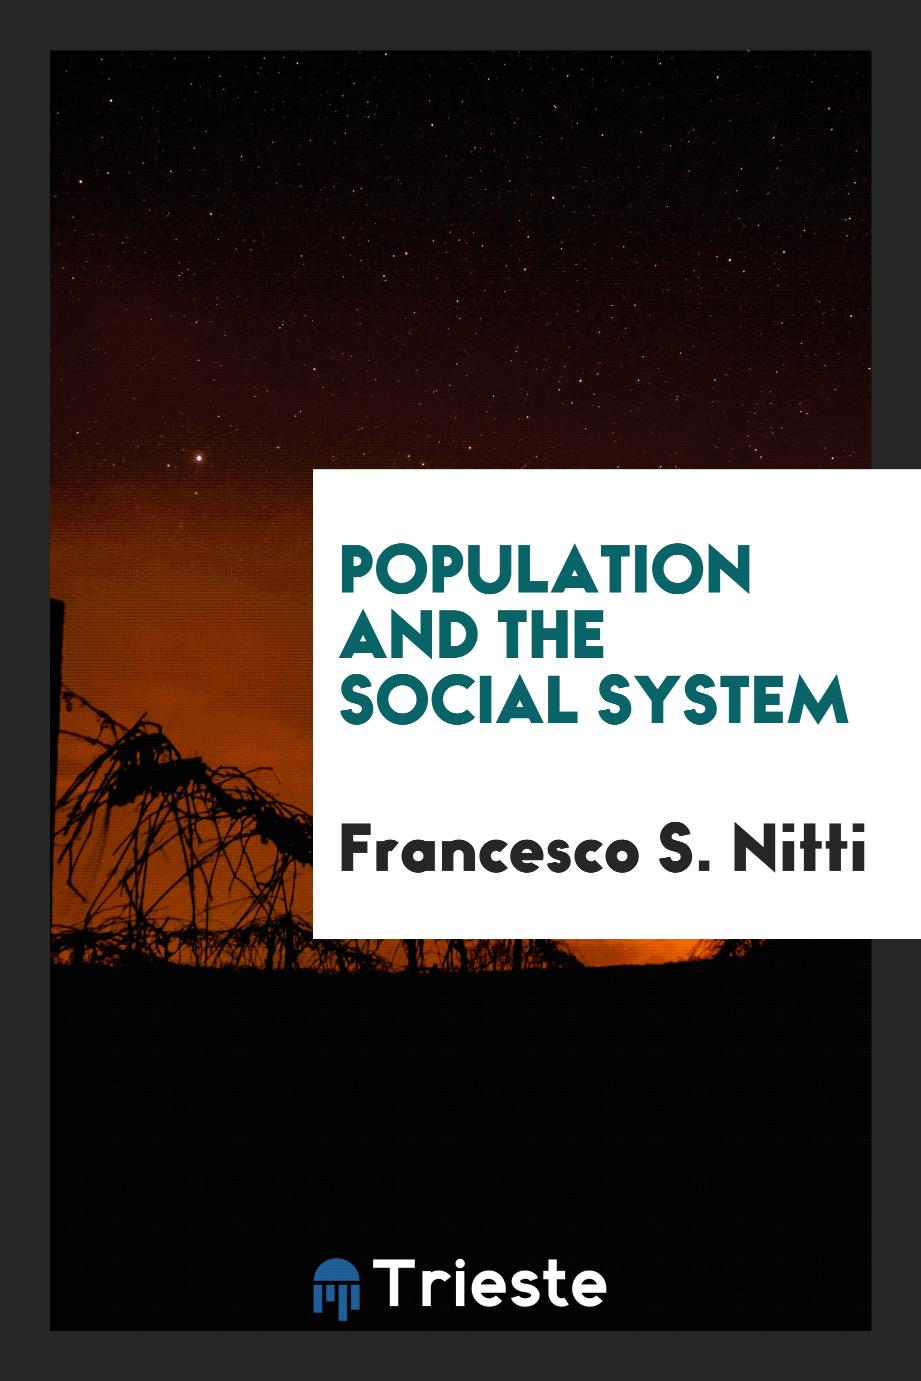 Population and the social system